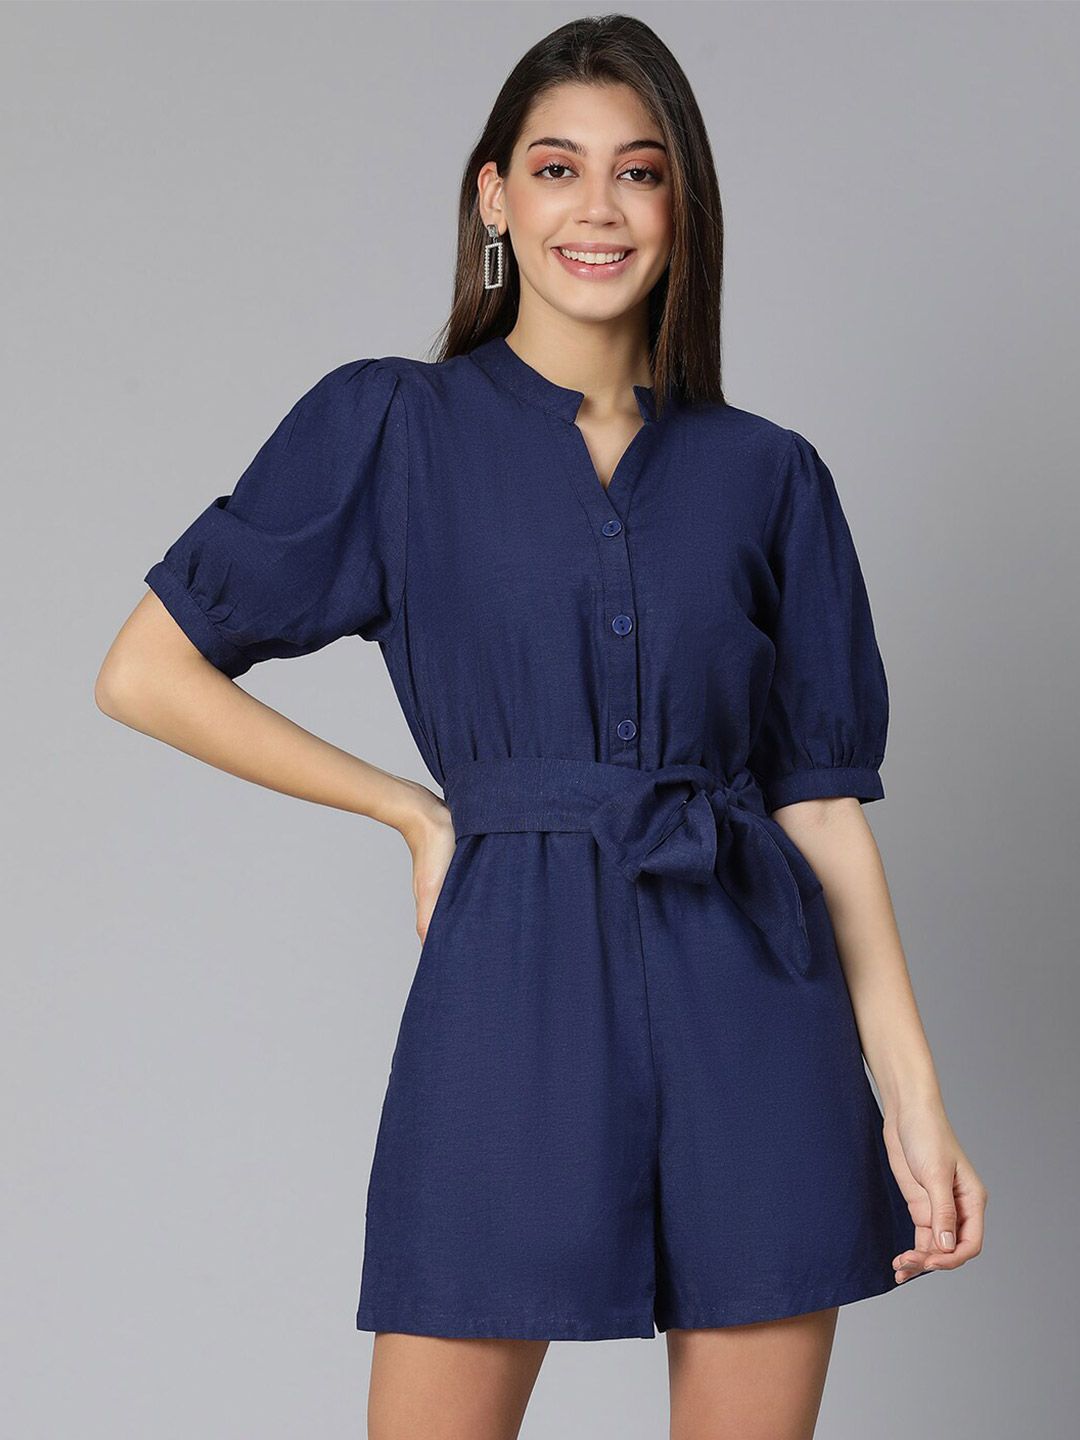 Oxolloxo Navy Blue Linen Blend Playsuit Price in India